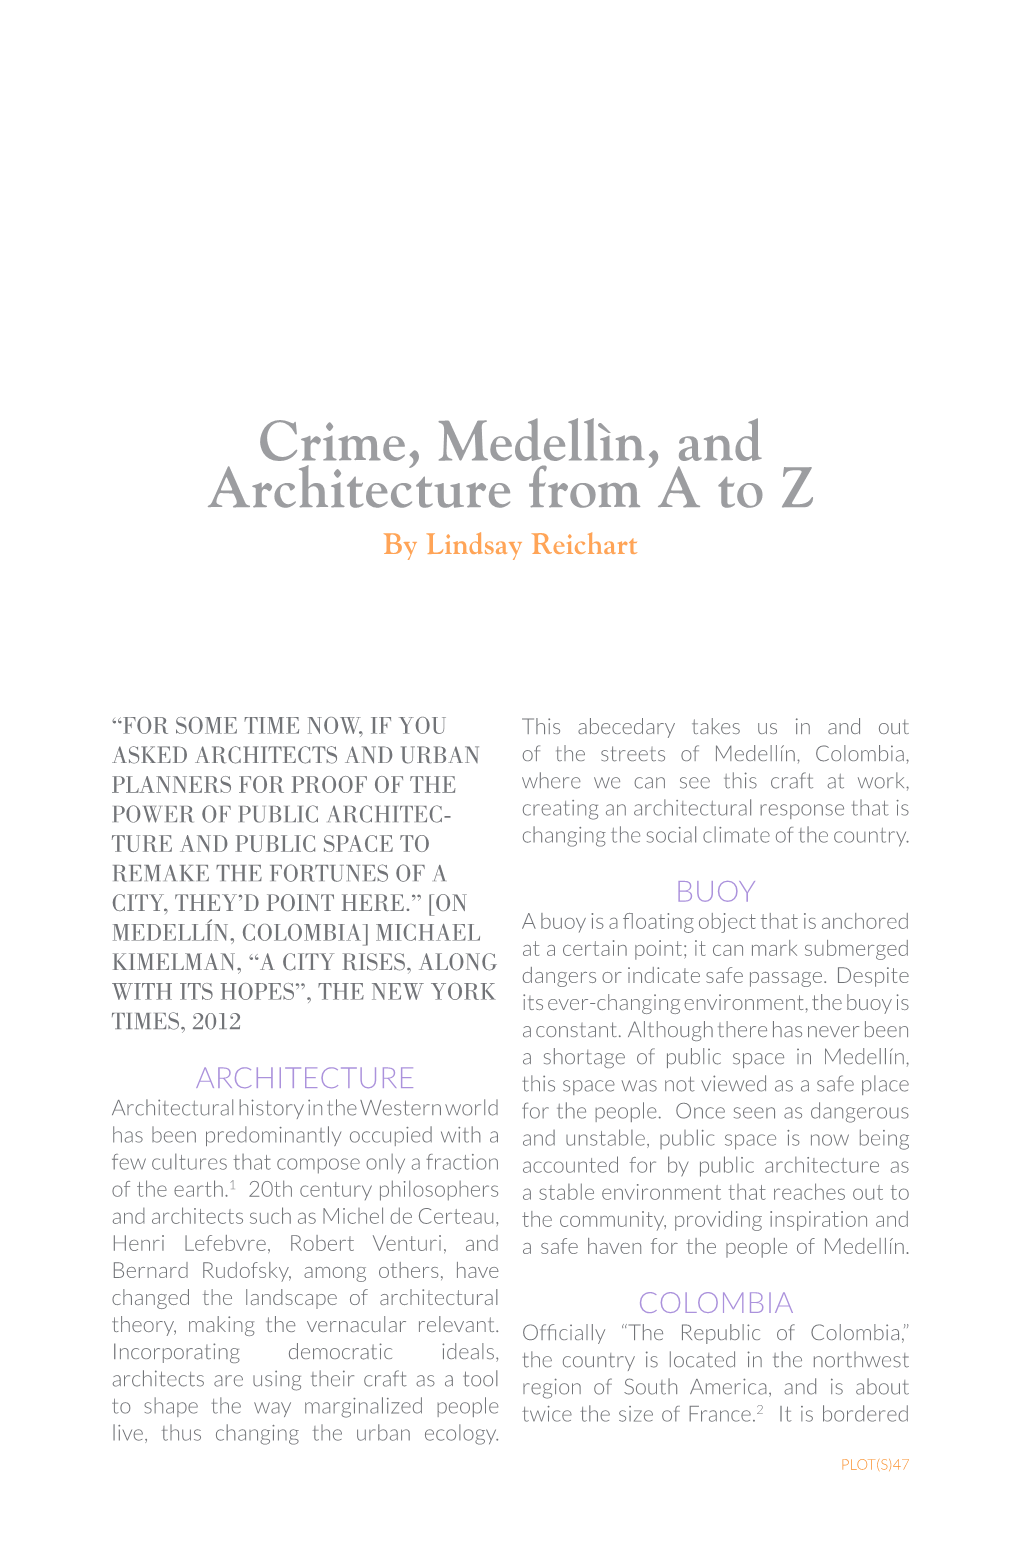 Crime, Medellìn, and Architecture from a to Z by Lindsay Reichart